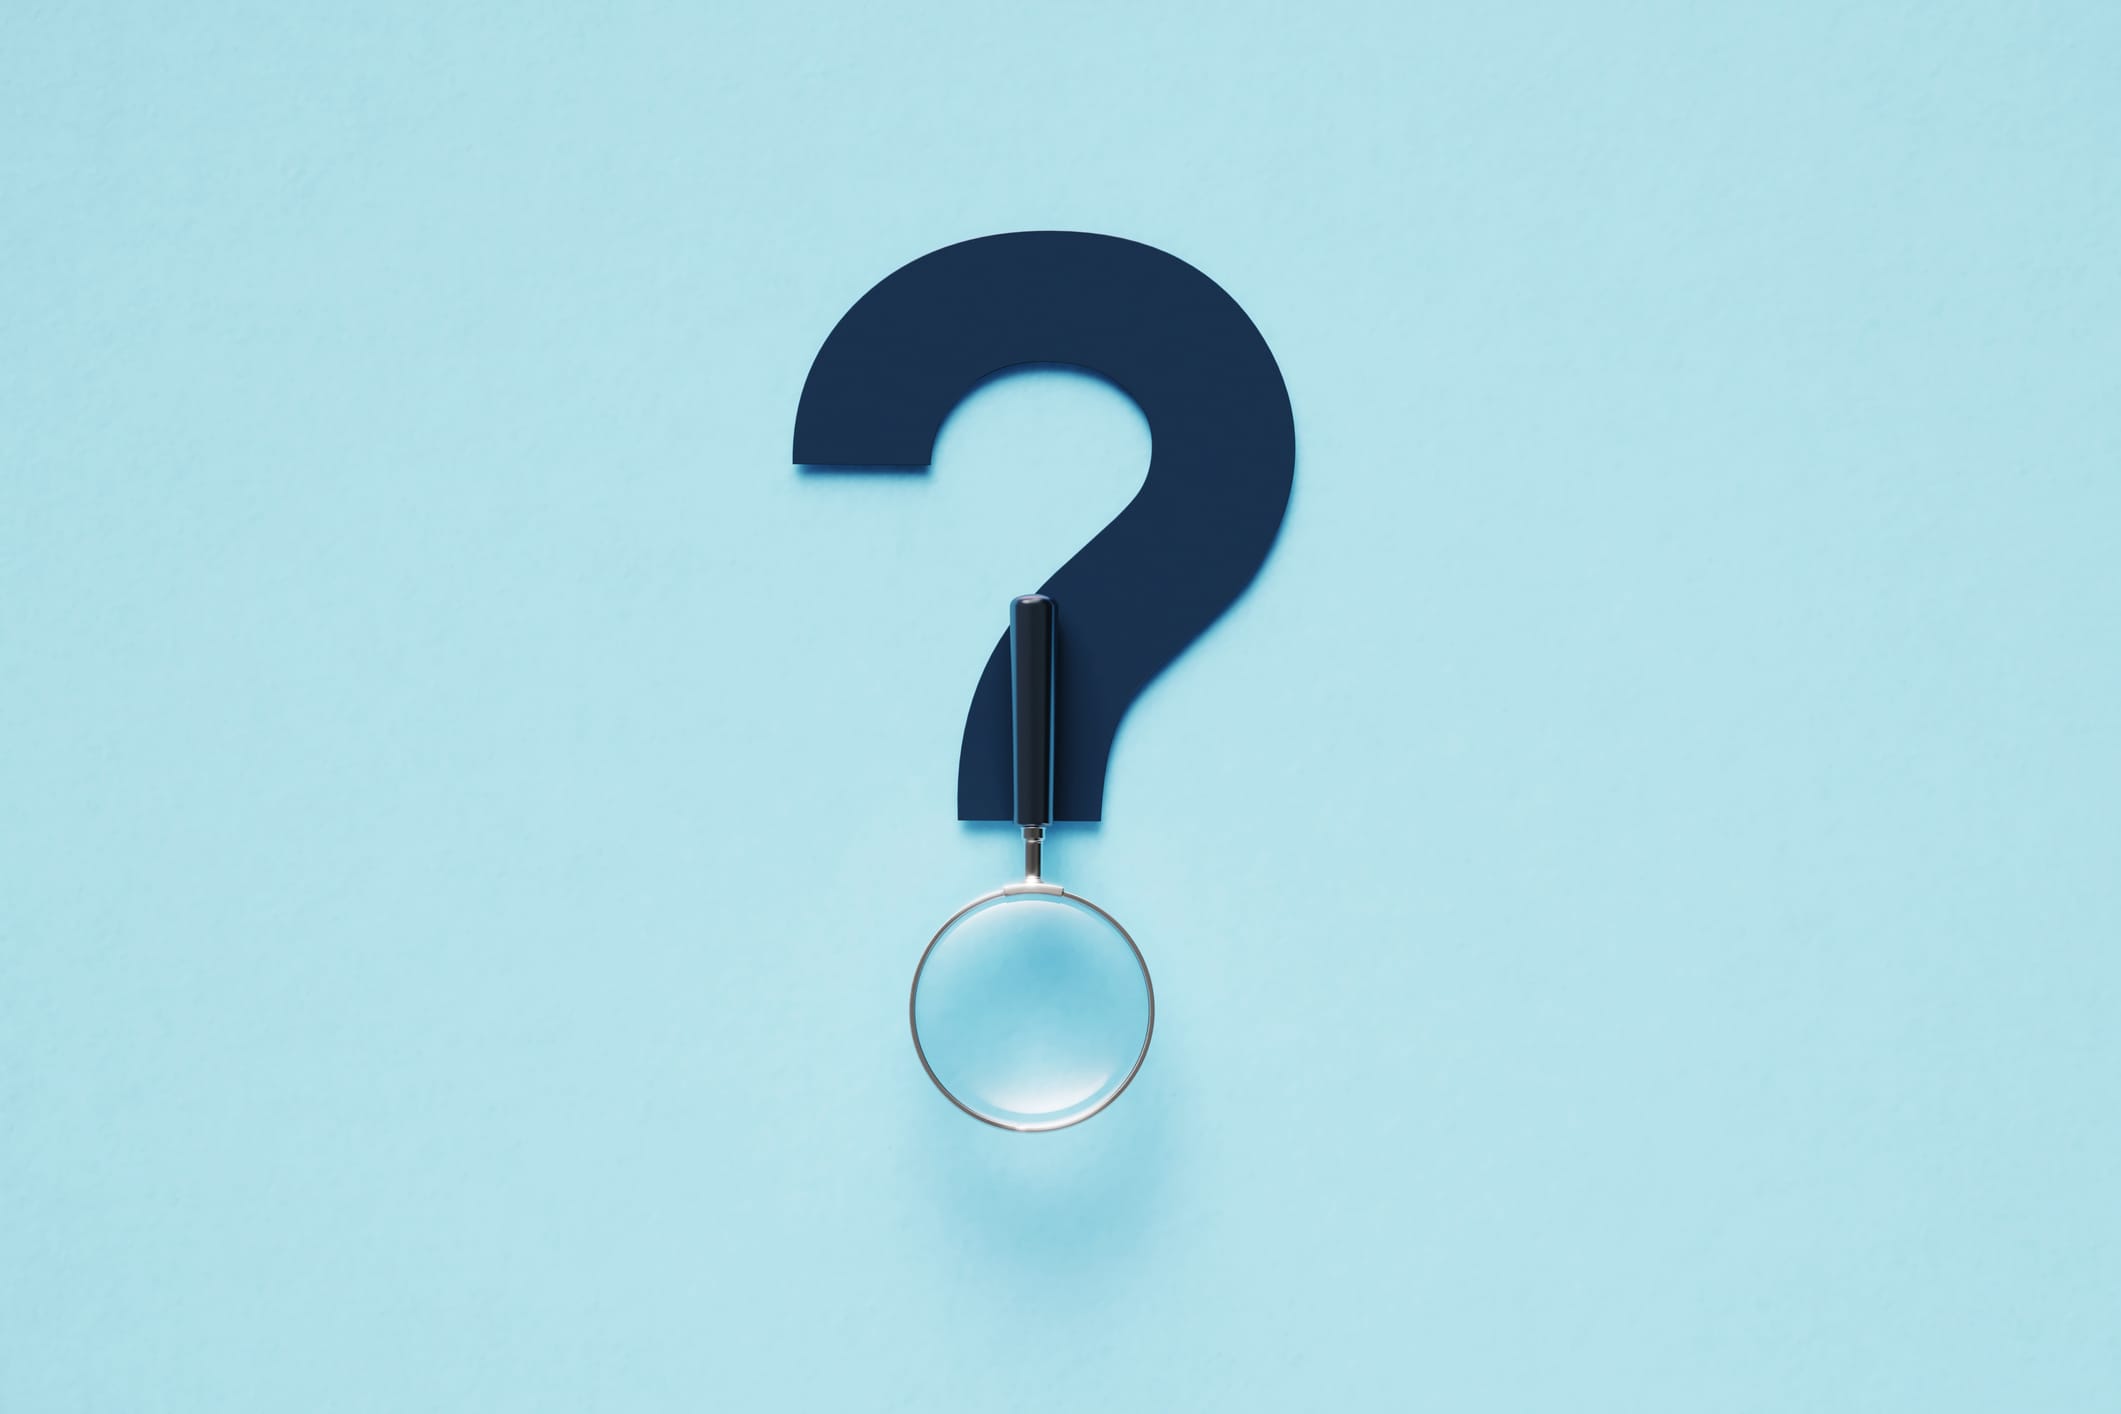 Magnifier Forming A Question Mark On Blue Background